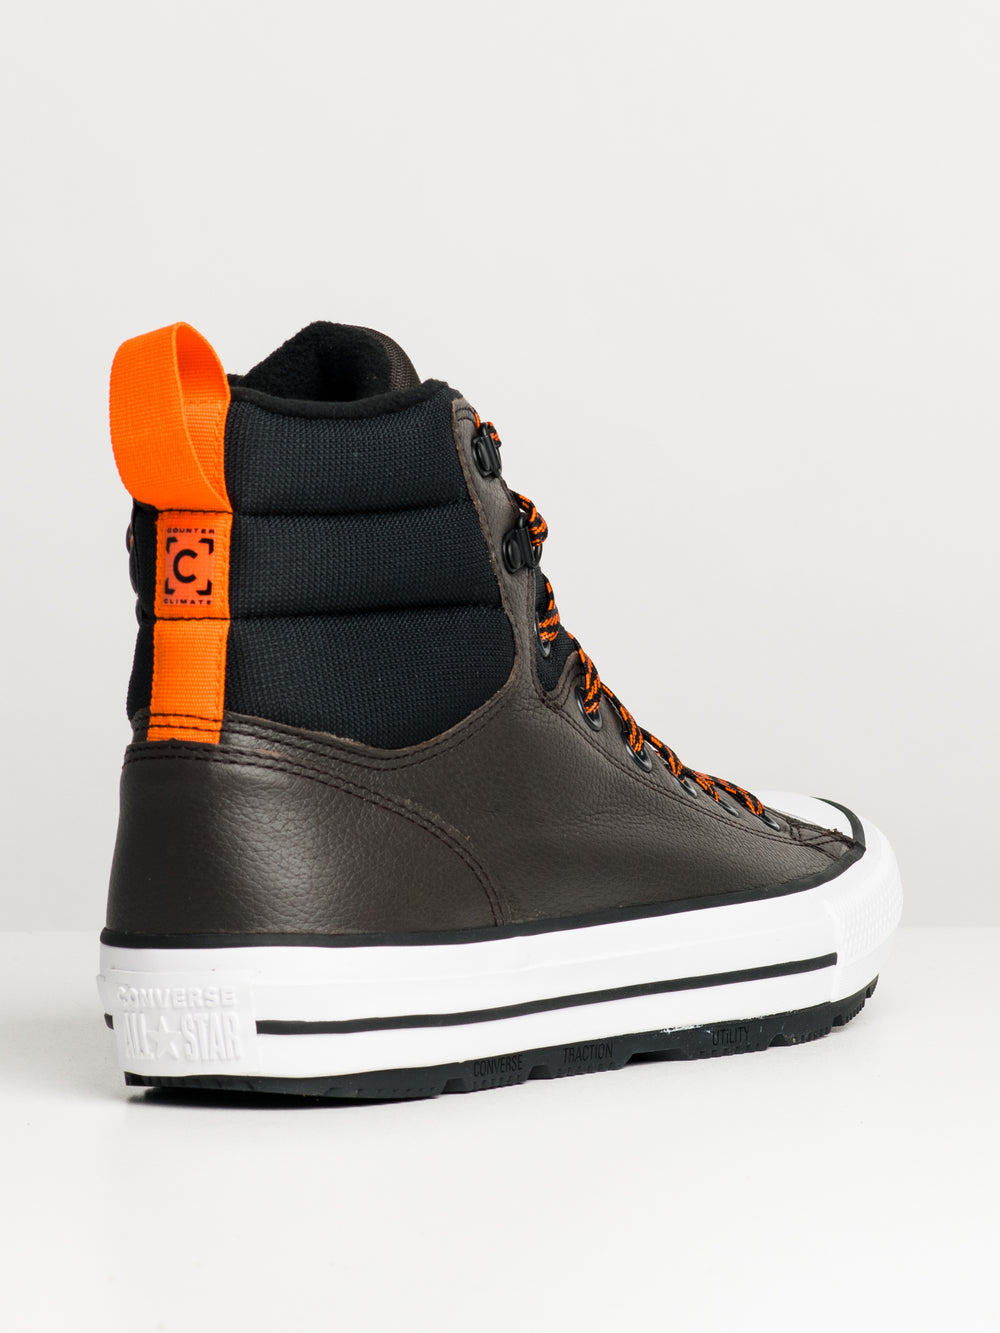 CONVERSE CHUCK TAYLOR ALL STAR BERKSHIRE BOOT POUR HOMME - DÉSTOCKAGE